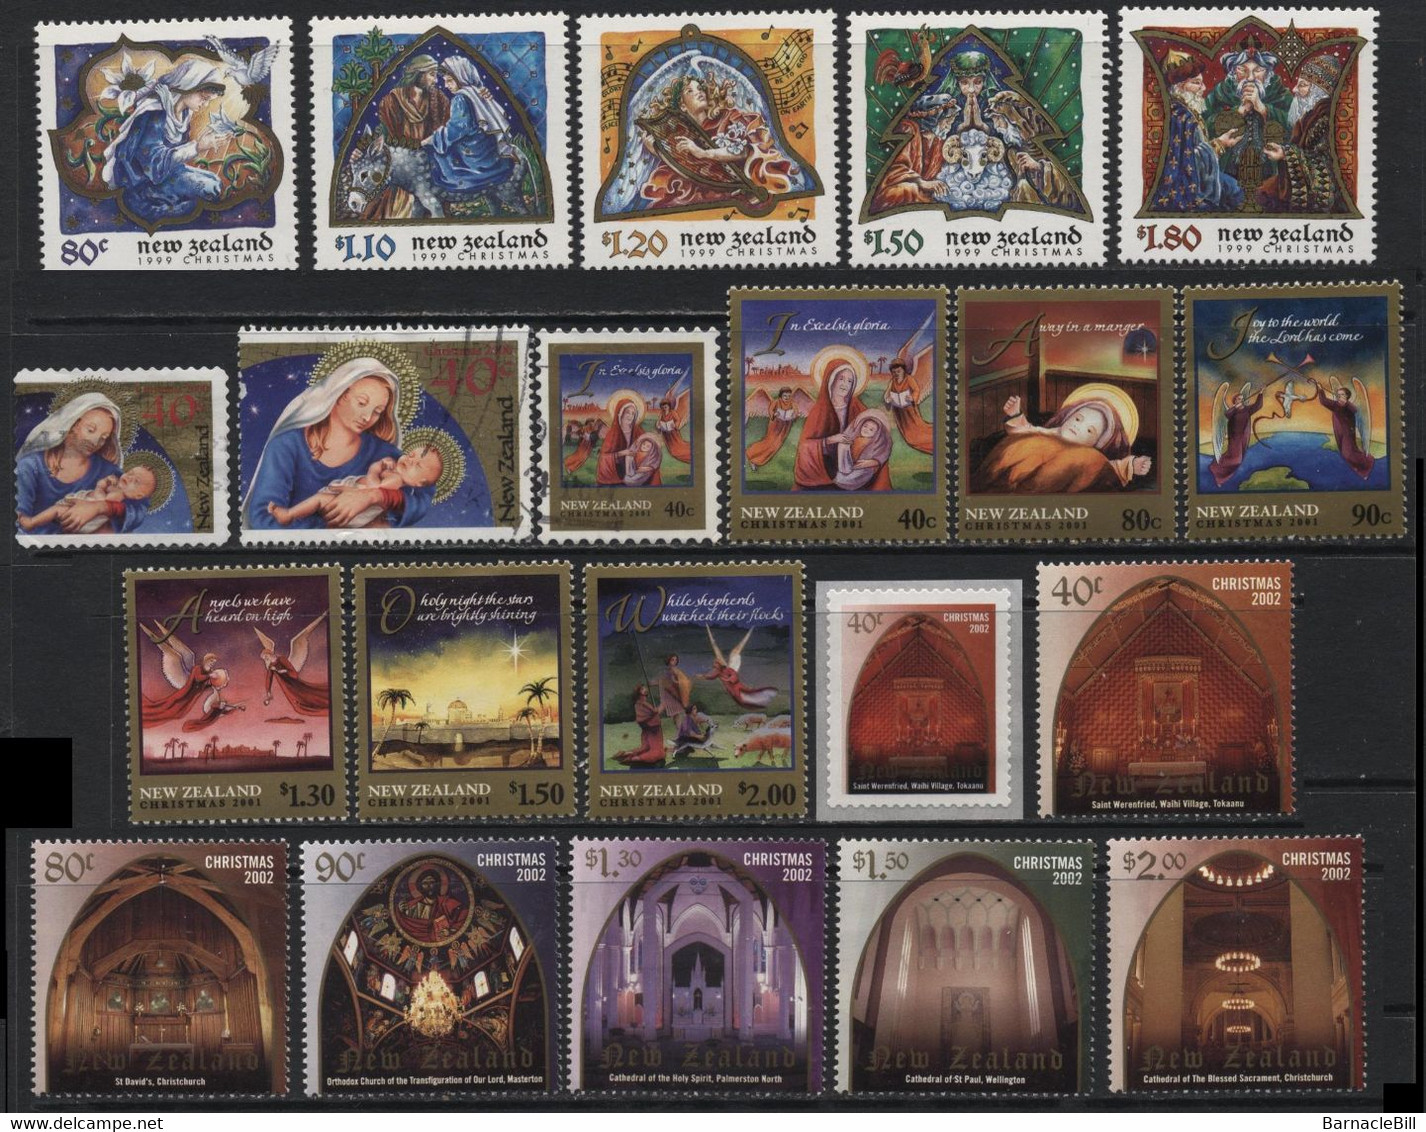 New Zealand (01) about 180 different Christmas stamps 1960-2008. Mint & Used. Hinged